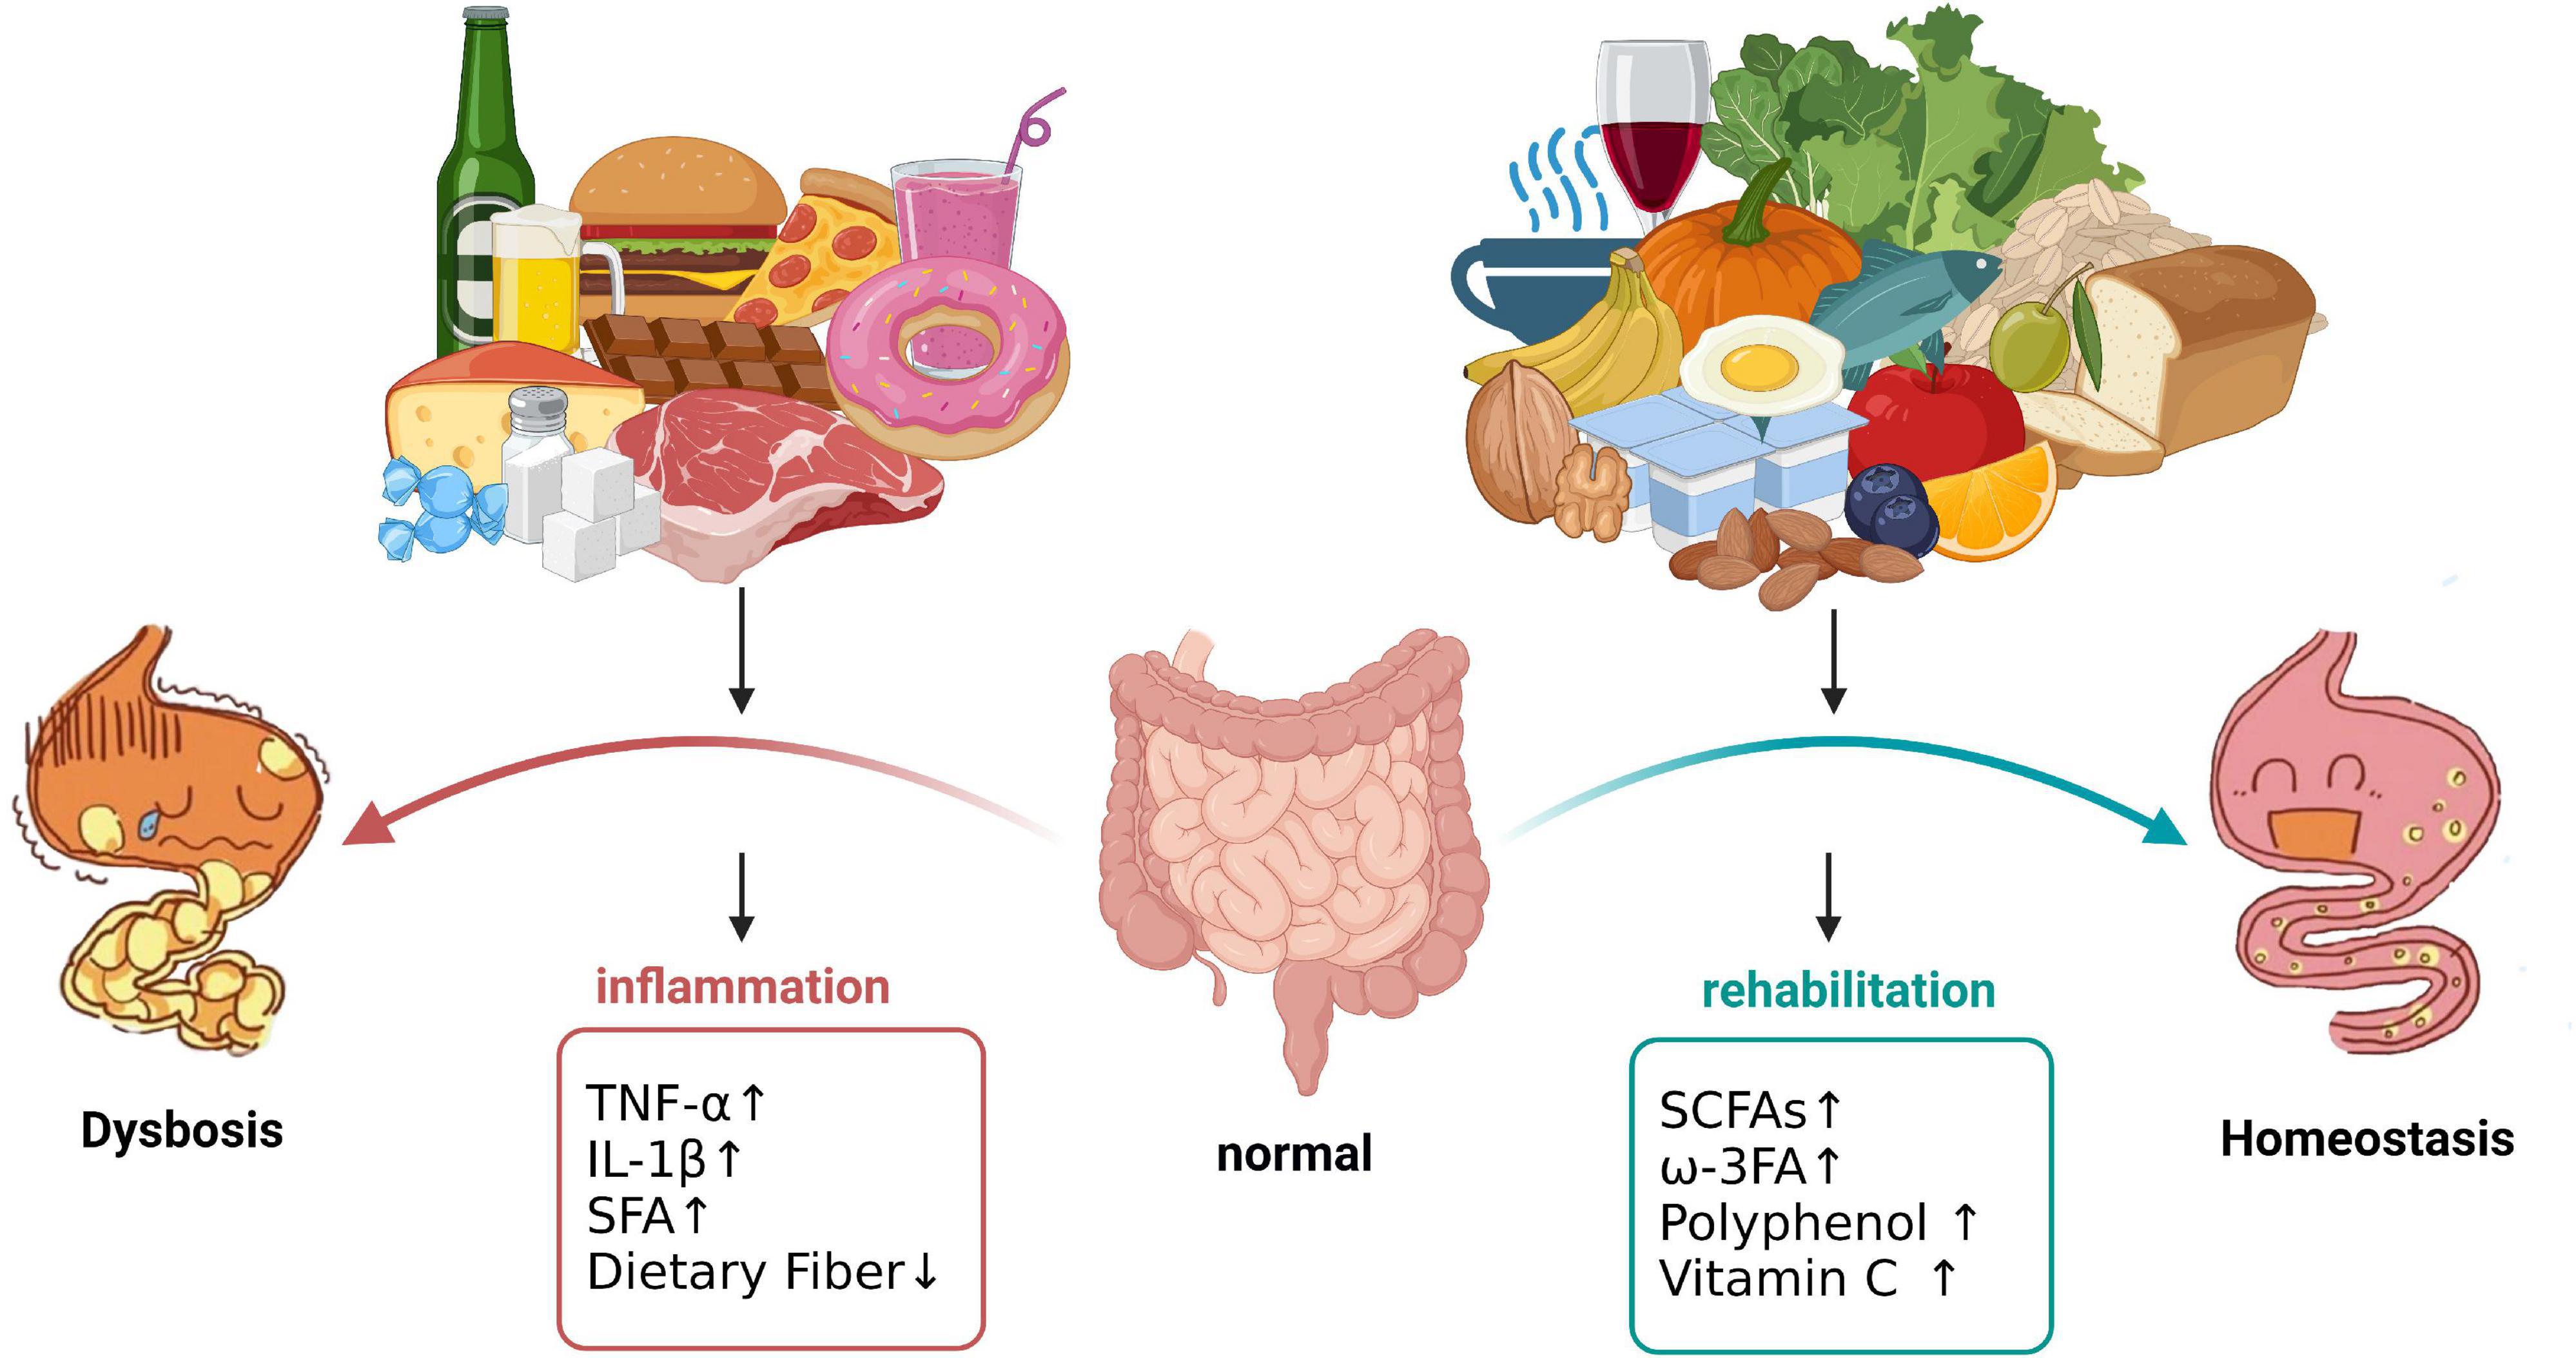 Comparison and recommendation of dietary patterns based on nutrients for Eastern and Western patients with inflammatory bowel disease